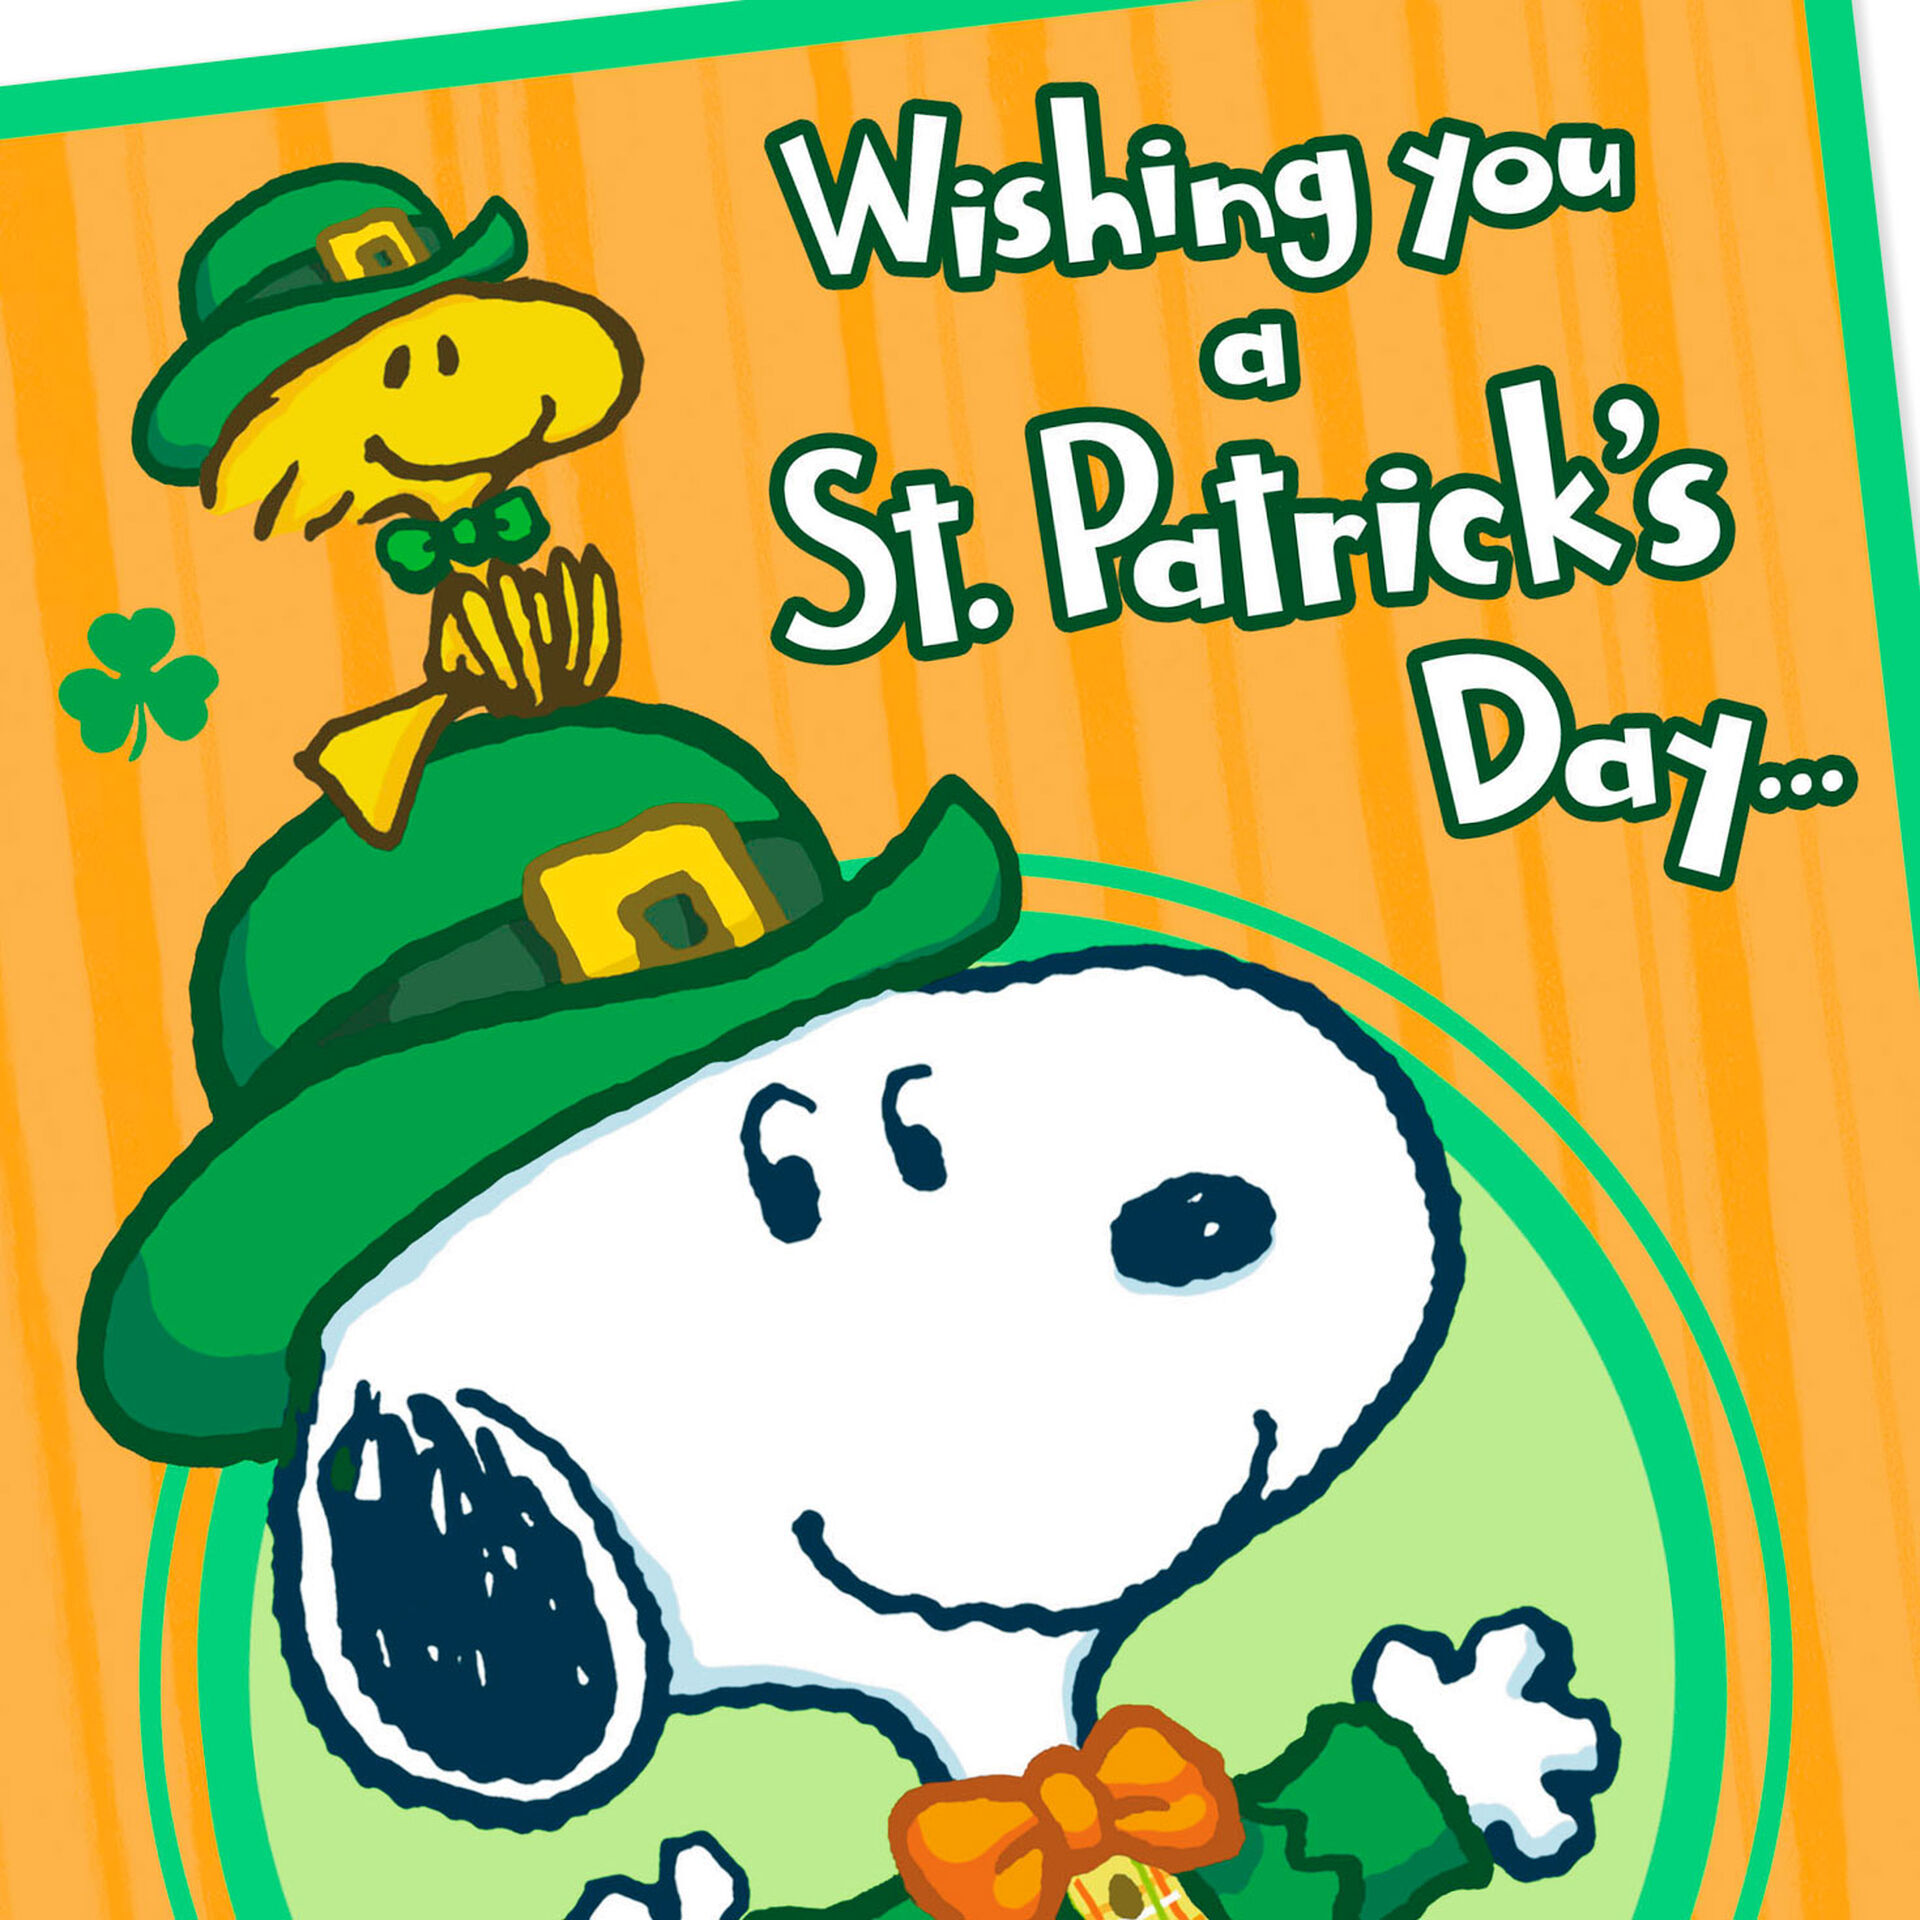 peanuts-snoopy-and-woodstock-st-patrick-s-day-card-greeting-cards